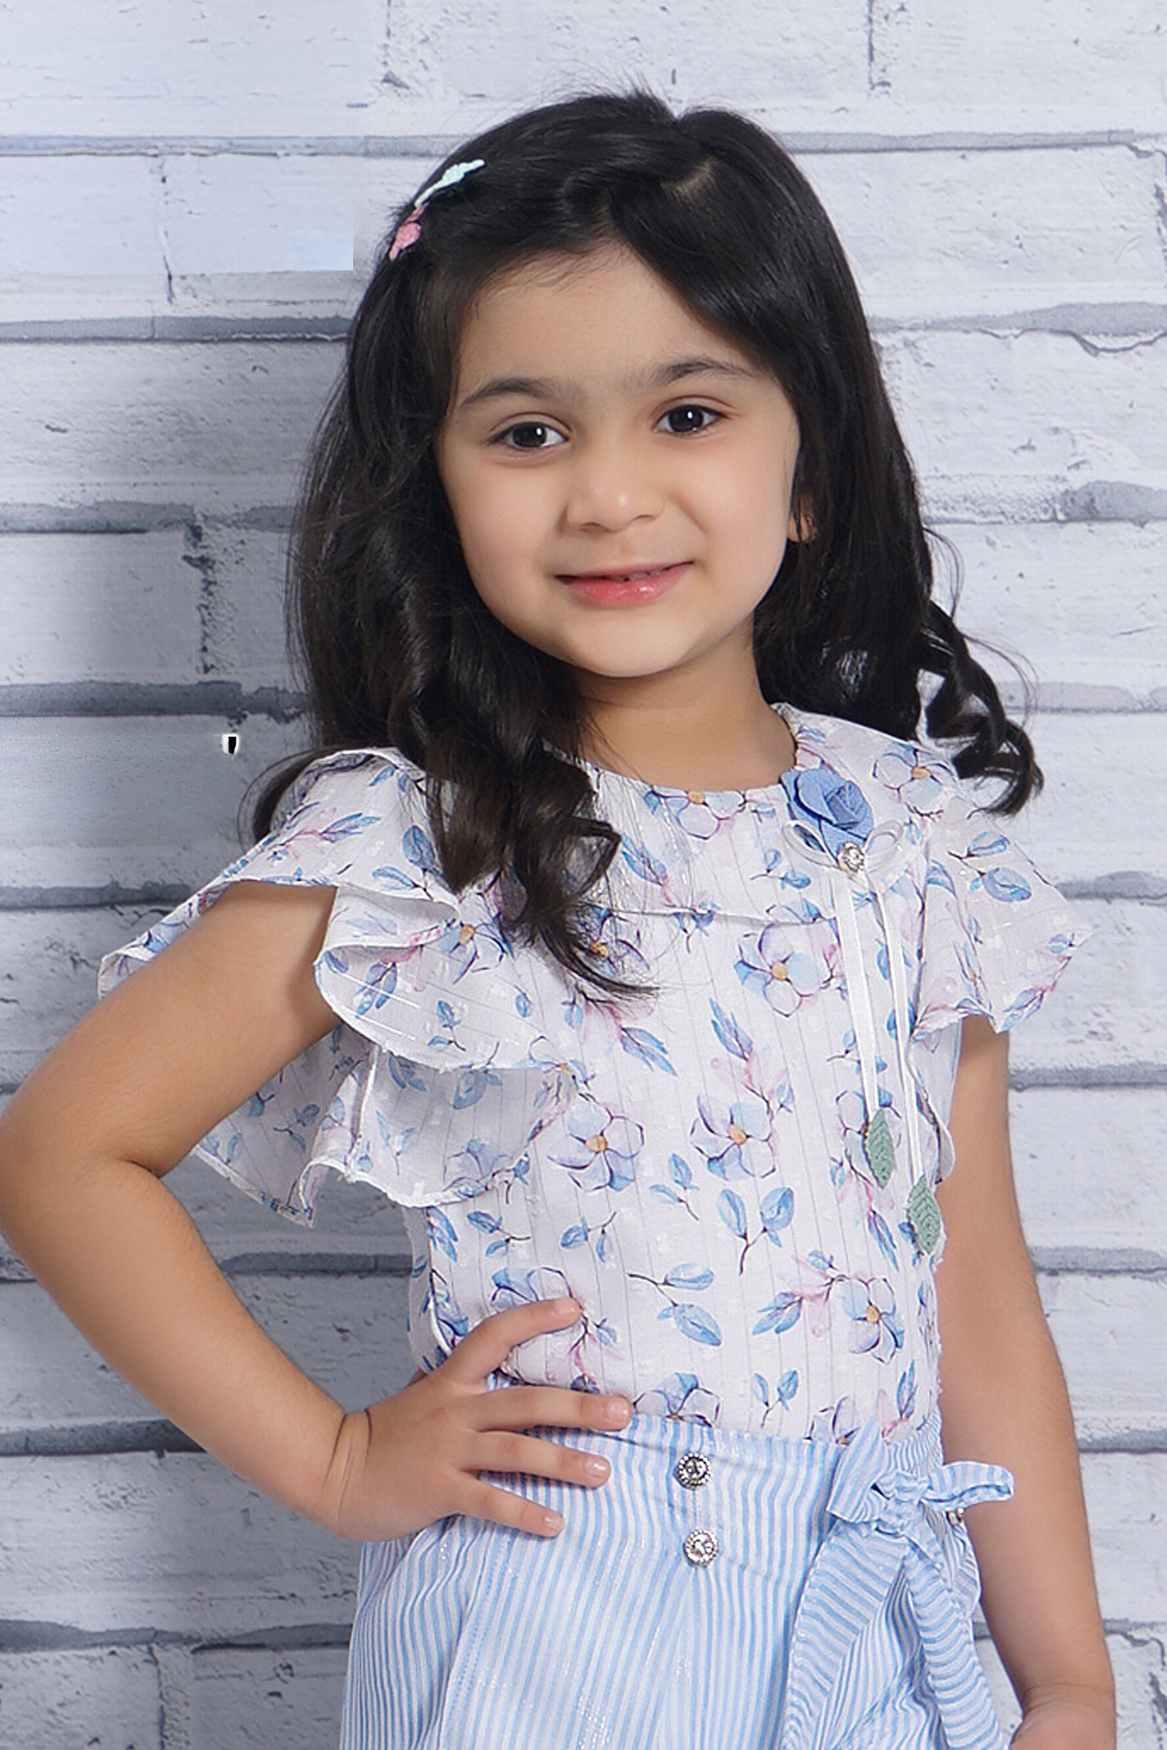 White Chiffon Floral Printed Top With Blue Shorts Set For Girls - Lagorii Kids